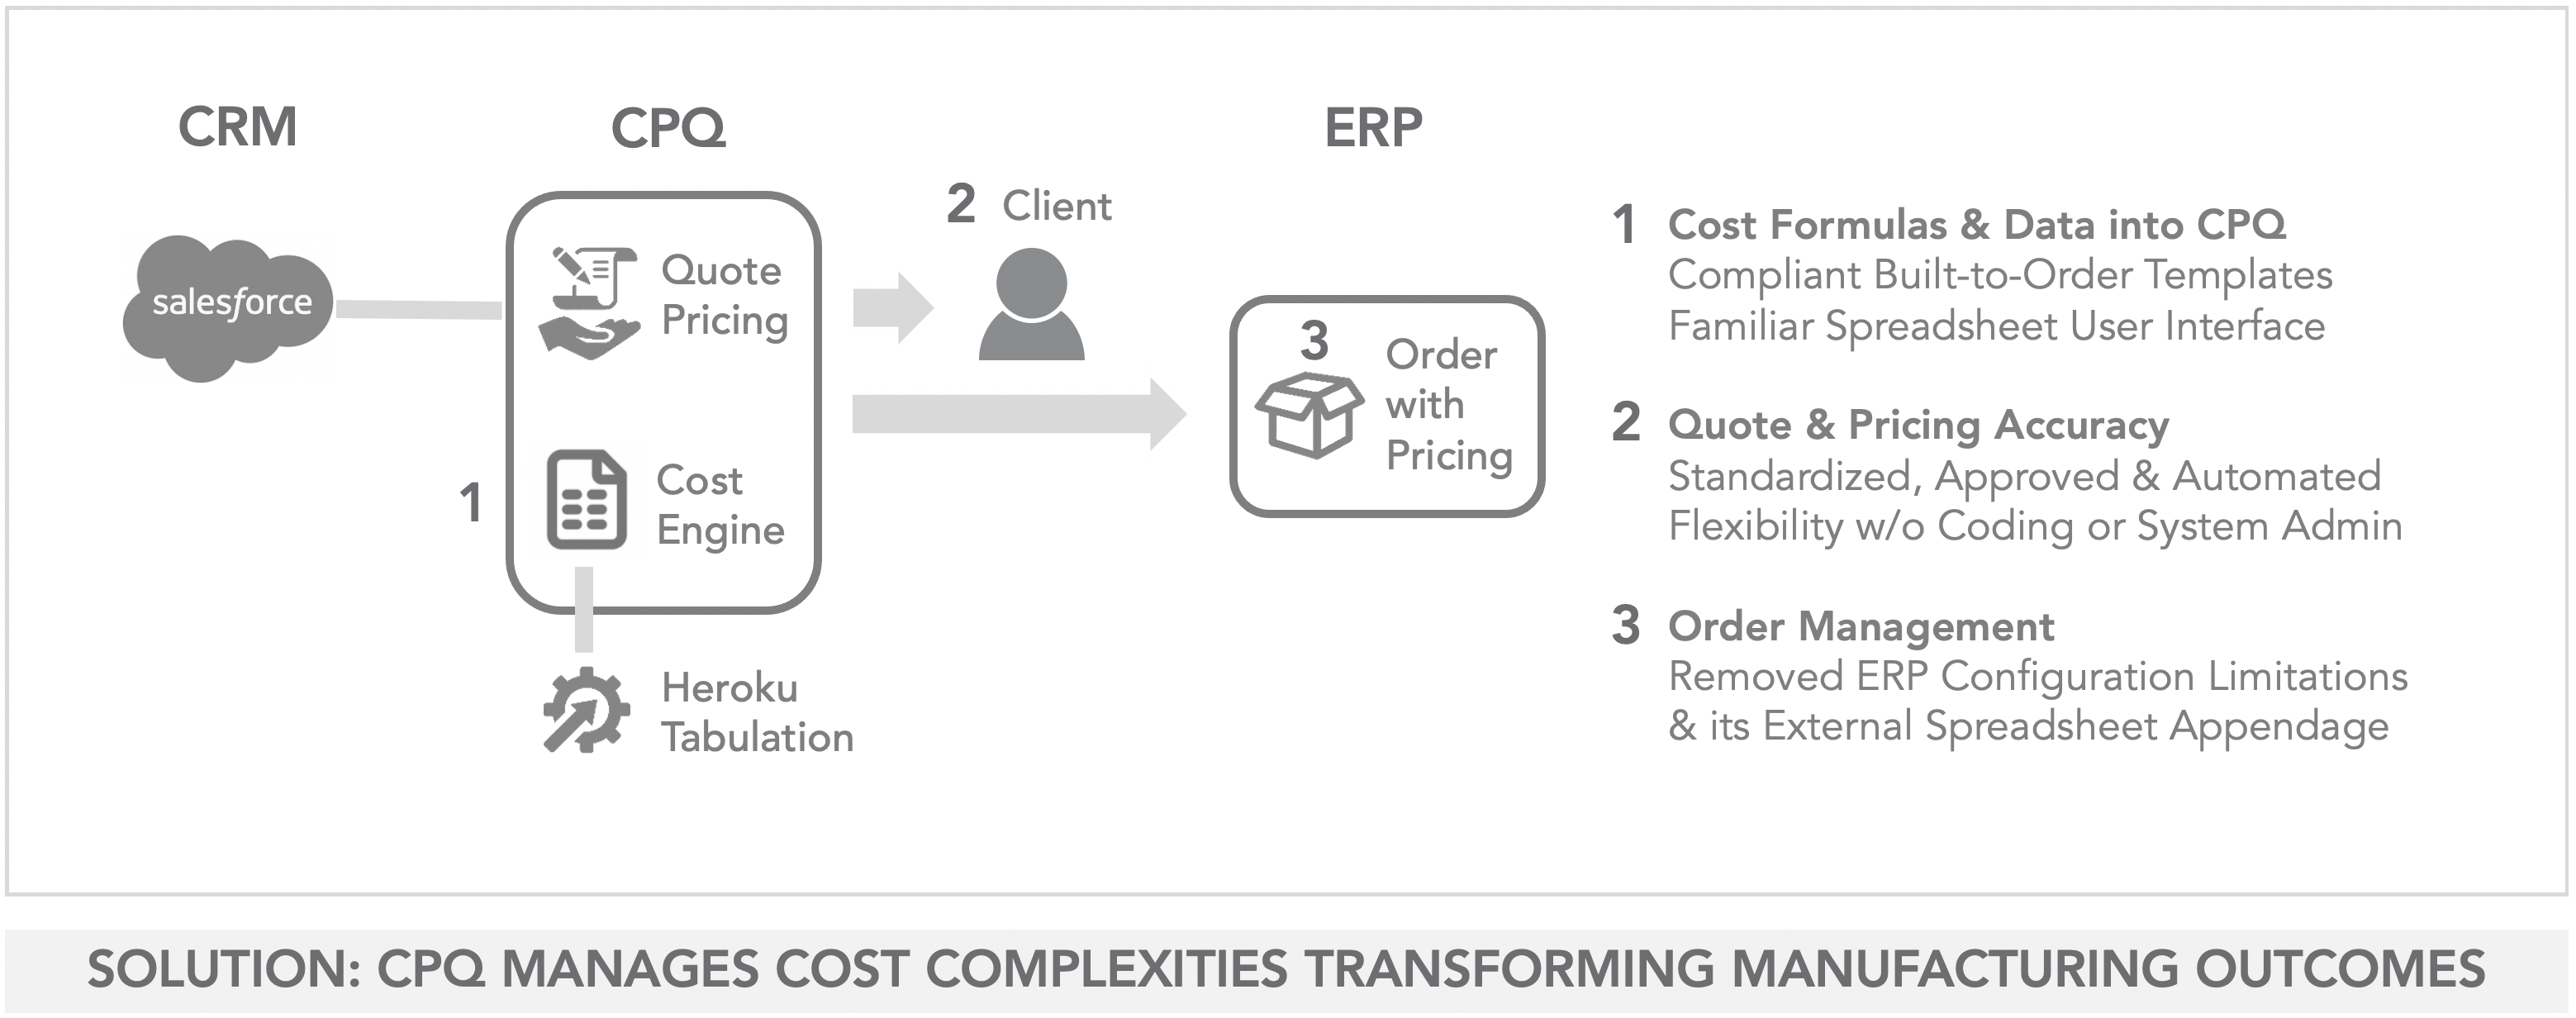 CPQ Manages Cost Complexities Transforming Manufacturing Outcomes